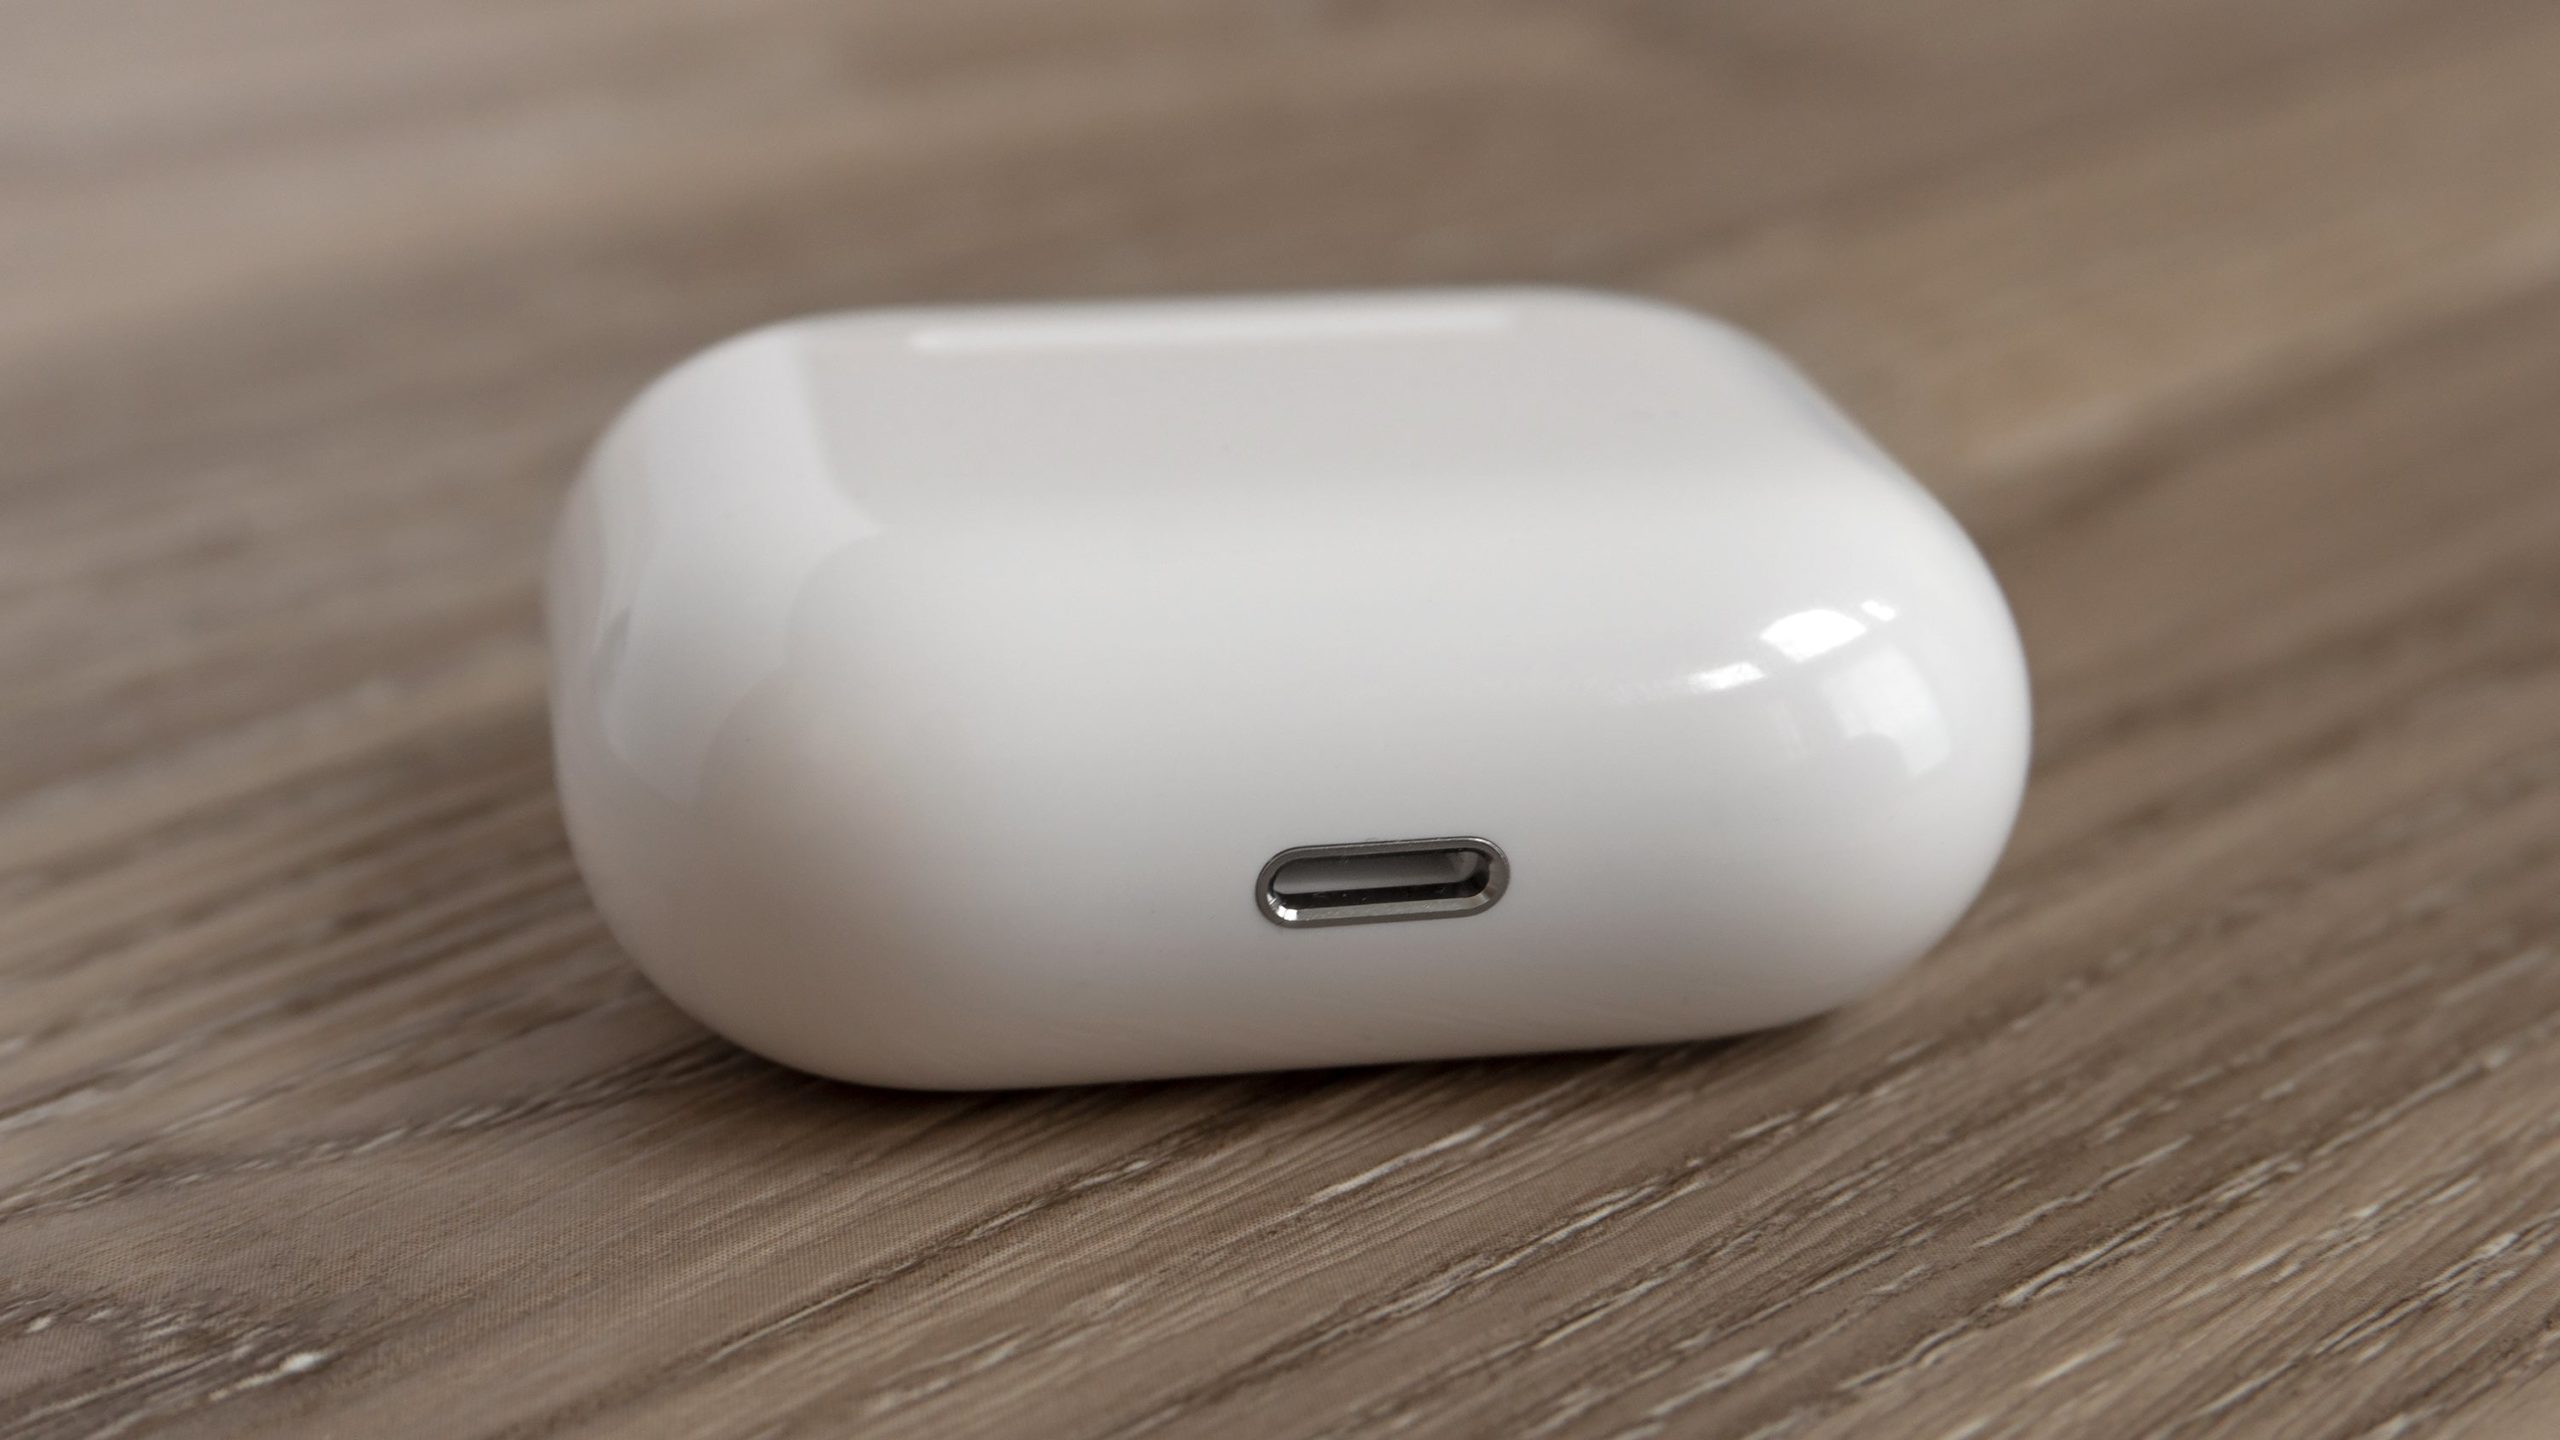 If you want to charge the AirPods case as quickly as possible, you'll need to keep a Lightning cable on hand — that's not a USB-C port. (Photo: Andrew Liszewski - Gizmodo)